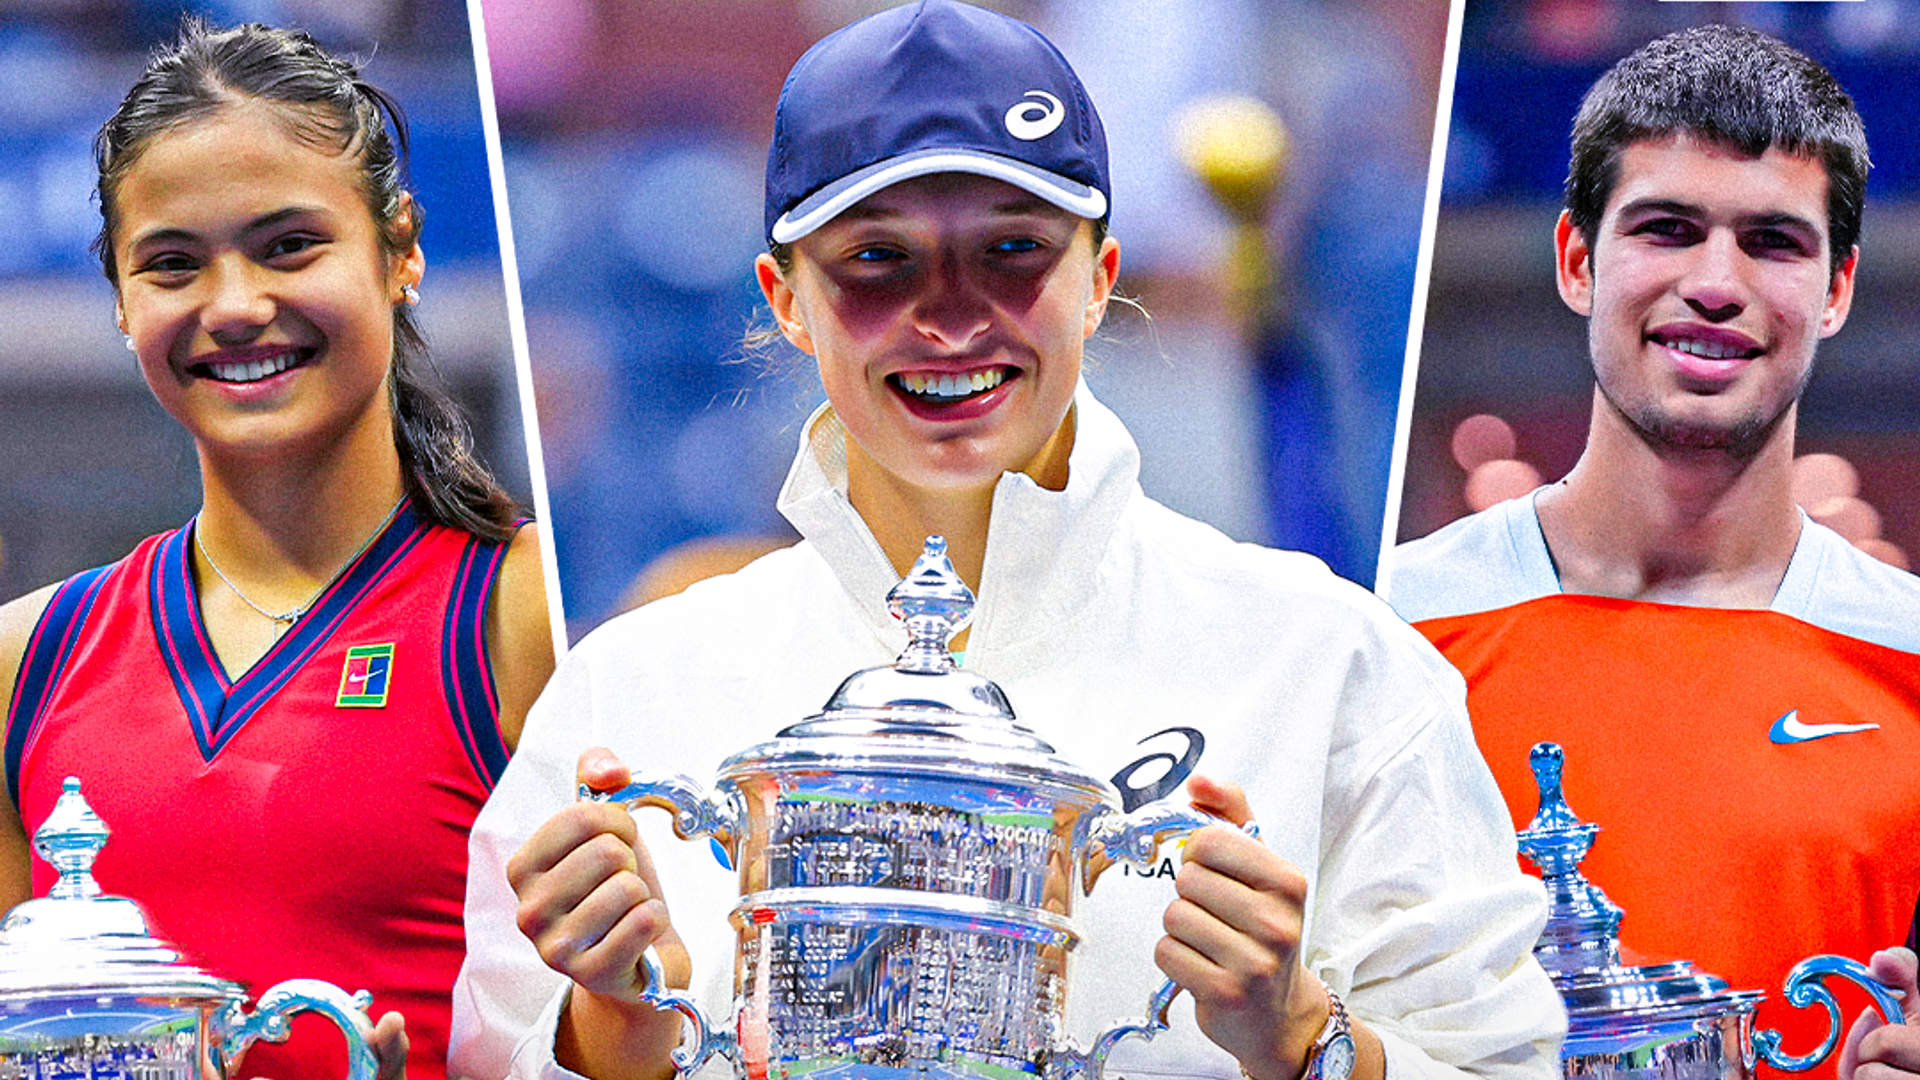 US Open tennis returns to Sky Sports from 2023 in new five-year deal